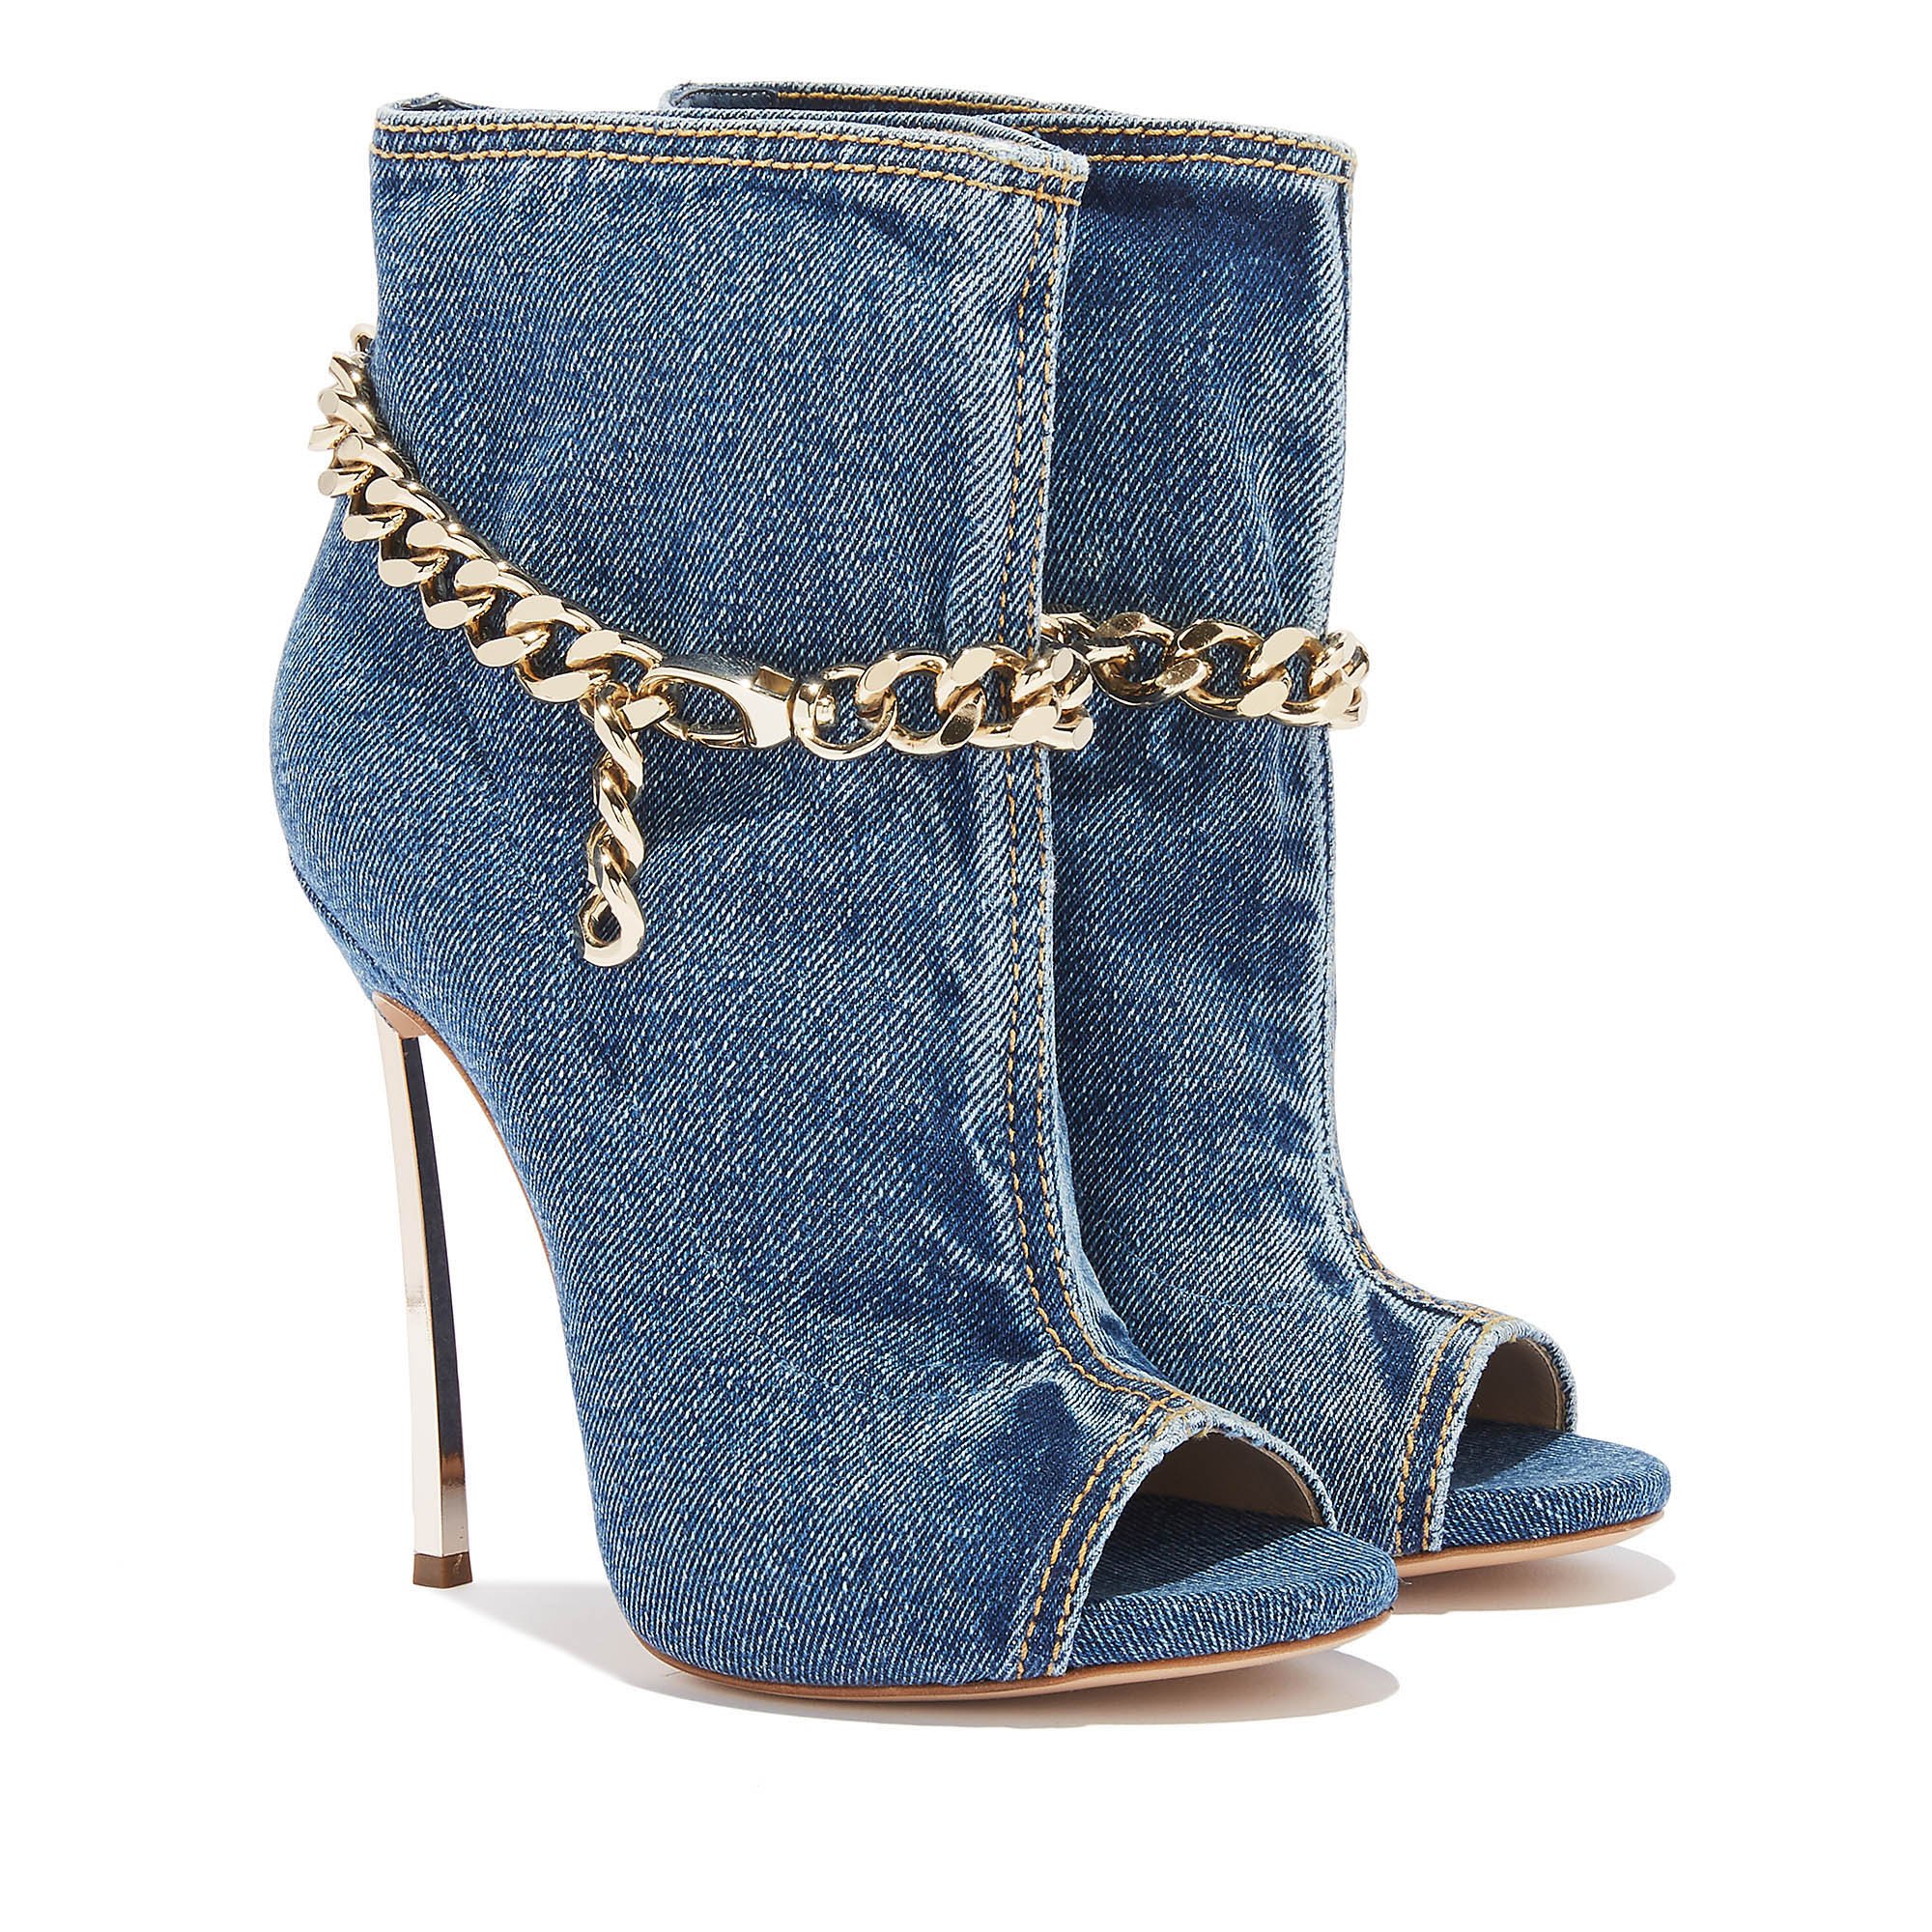 Women's Ankle Boots in Denim | Blade Jeans | Casadei